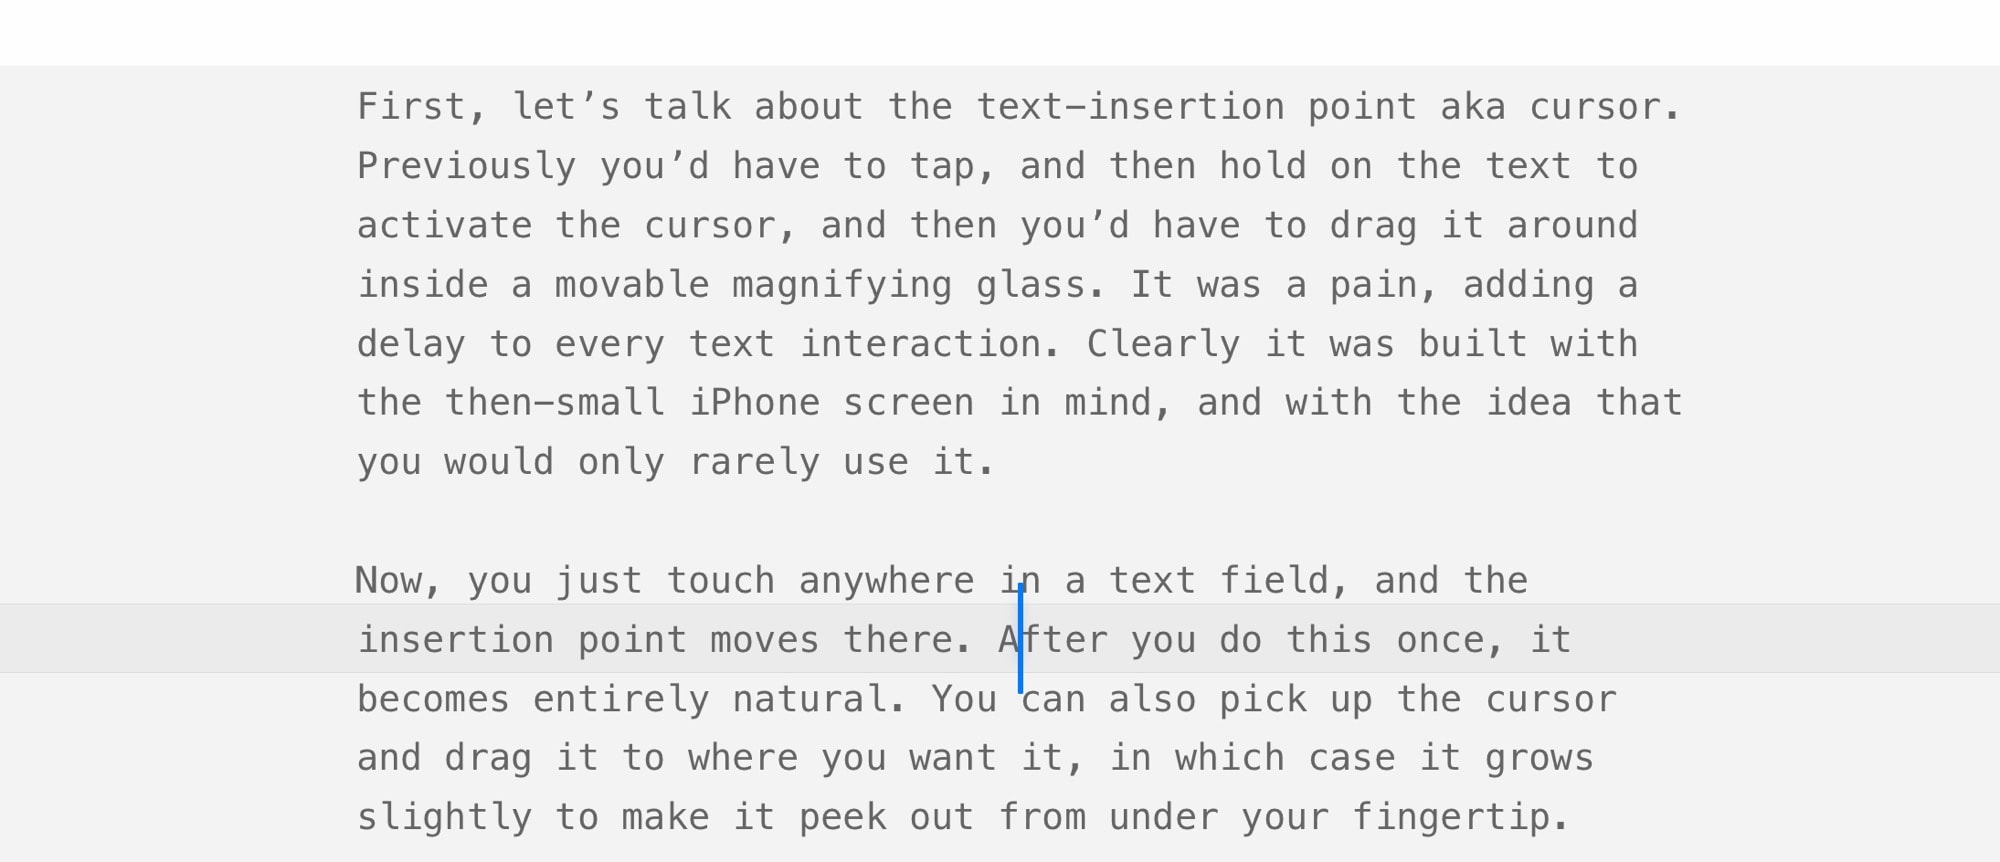 The text insertion point grows when you drag it.